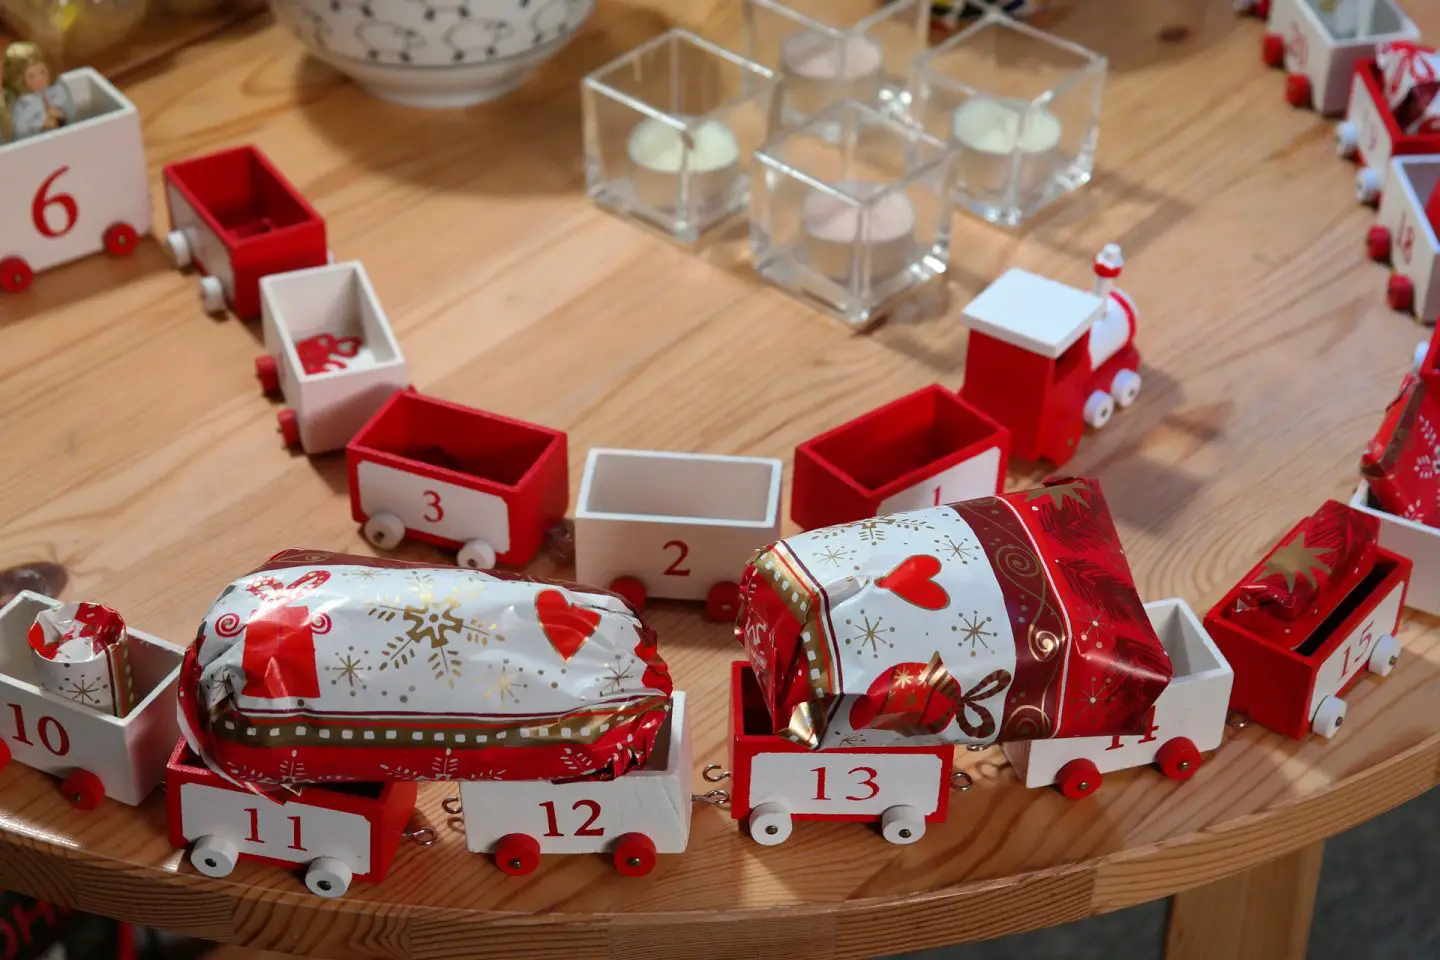 A table with a red and white wooden train advent calendar on it with gifts on the carriages.